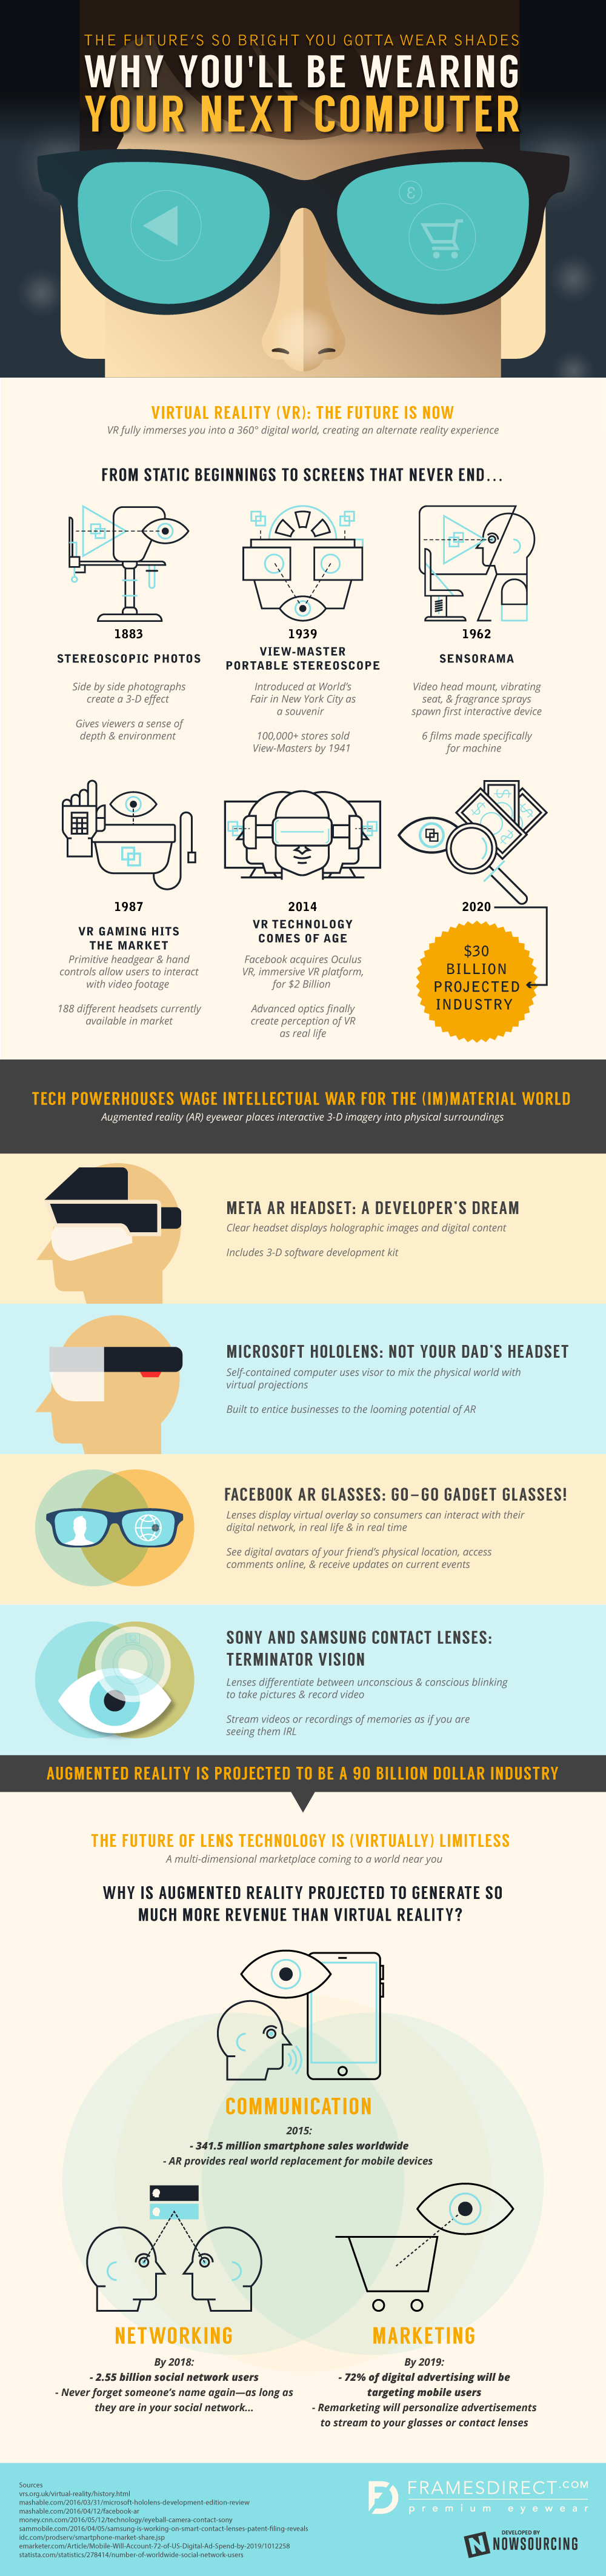 The Future Is Bright- For Virtual Reality [Infographic]